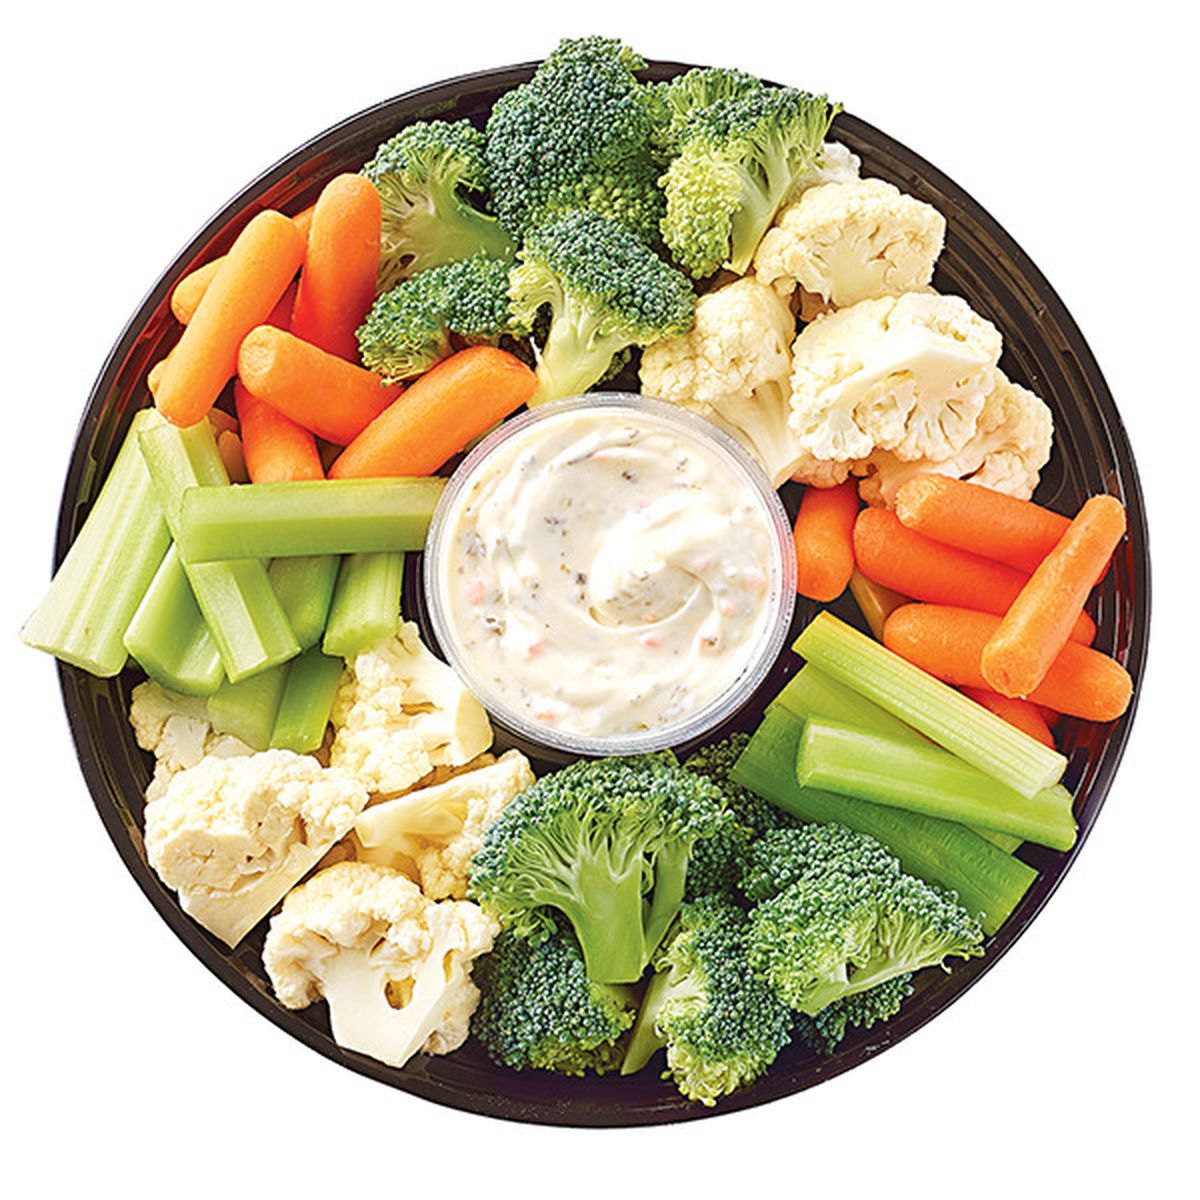 Calories in Wegmans Ranch Vegetables Tray for 2